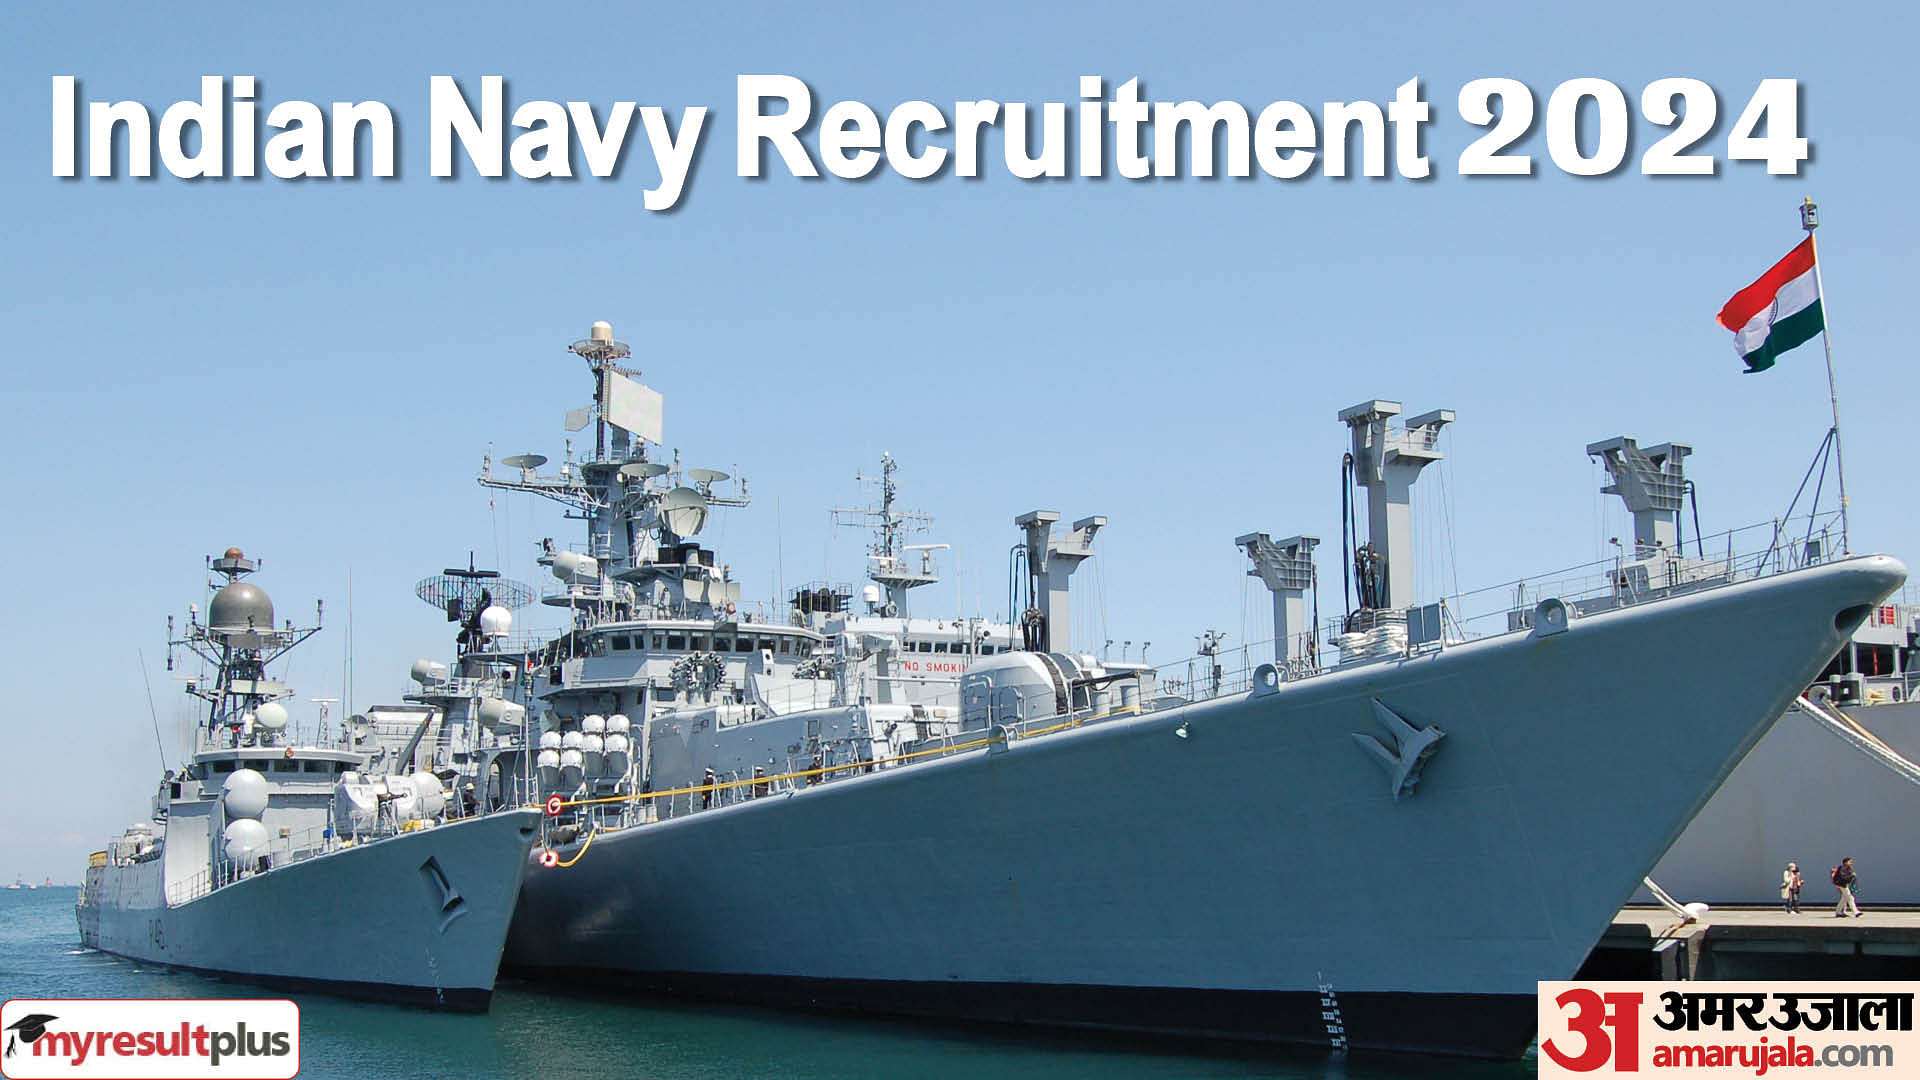 Indian Navy Recruitment 2024 Notification for MR- Musician posts released, Read complete details here